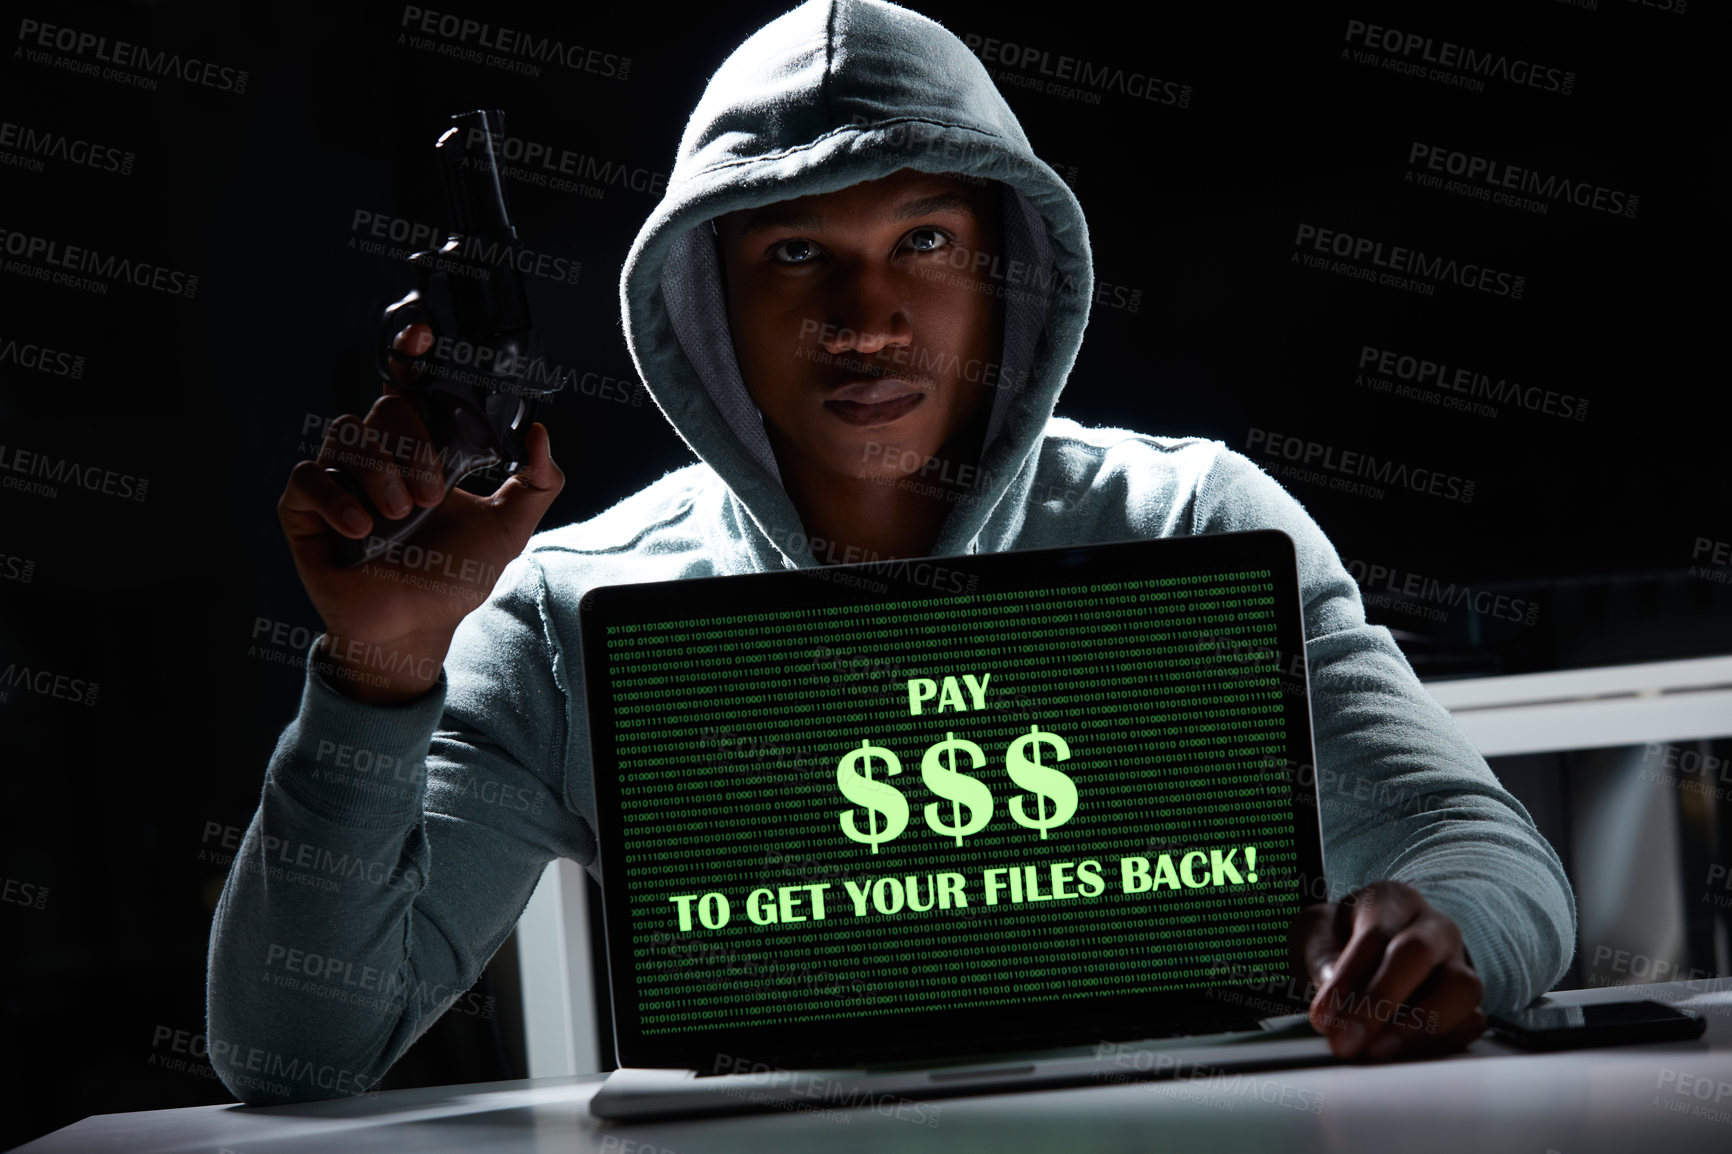 Buy stock photo Shot of an armed hacker using a laptop with “Pay $$$ to get your files back” on it